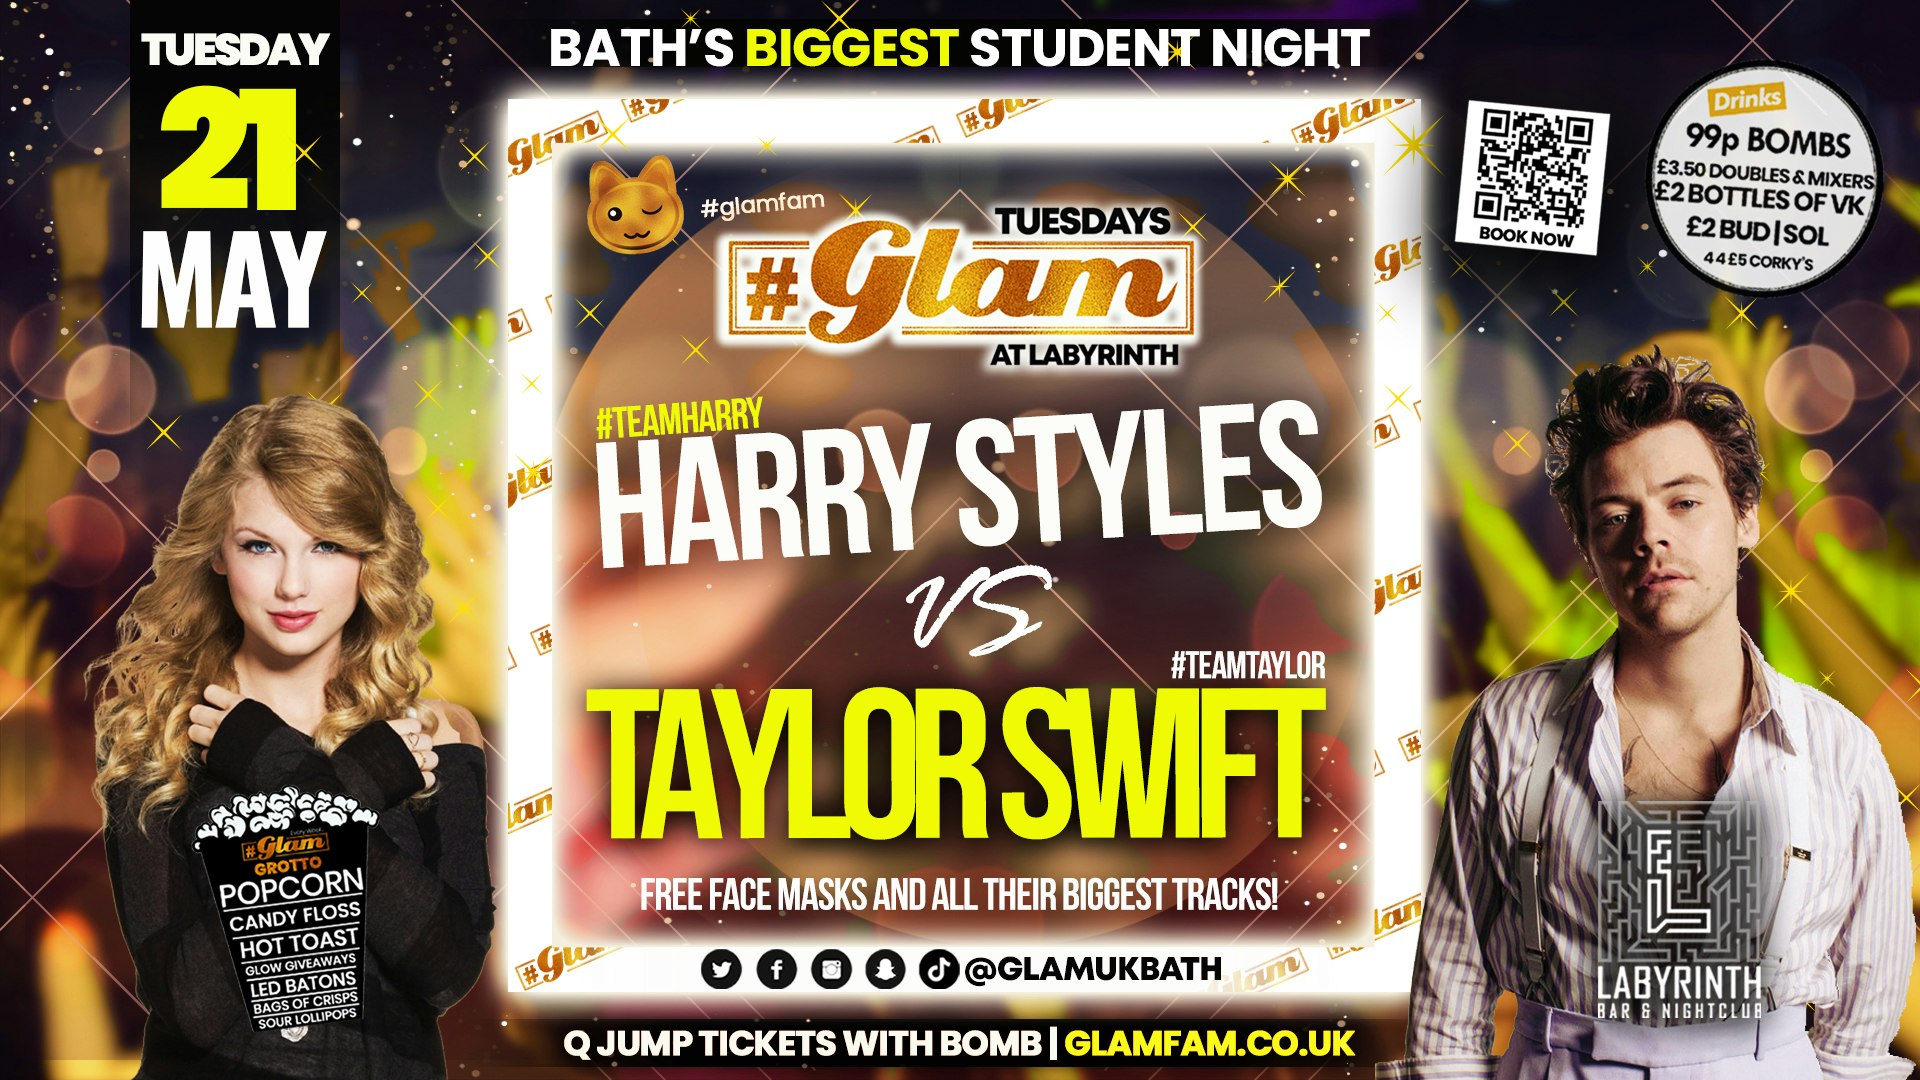 Glam – Bath’s Biggest Student Night – Taylor vs Harry 🤔 | Tuesdays at Labs